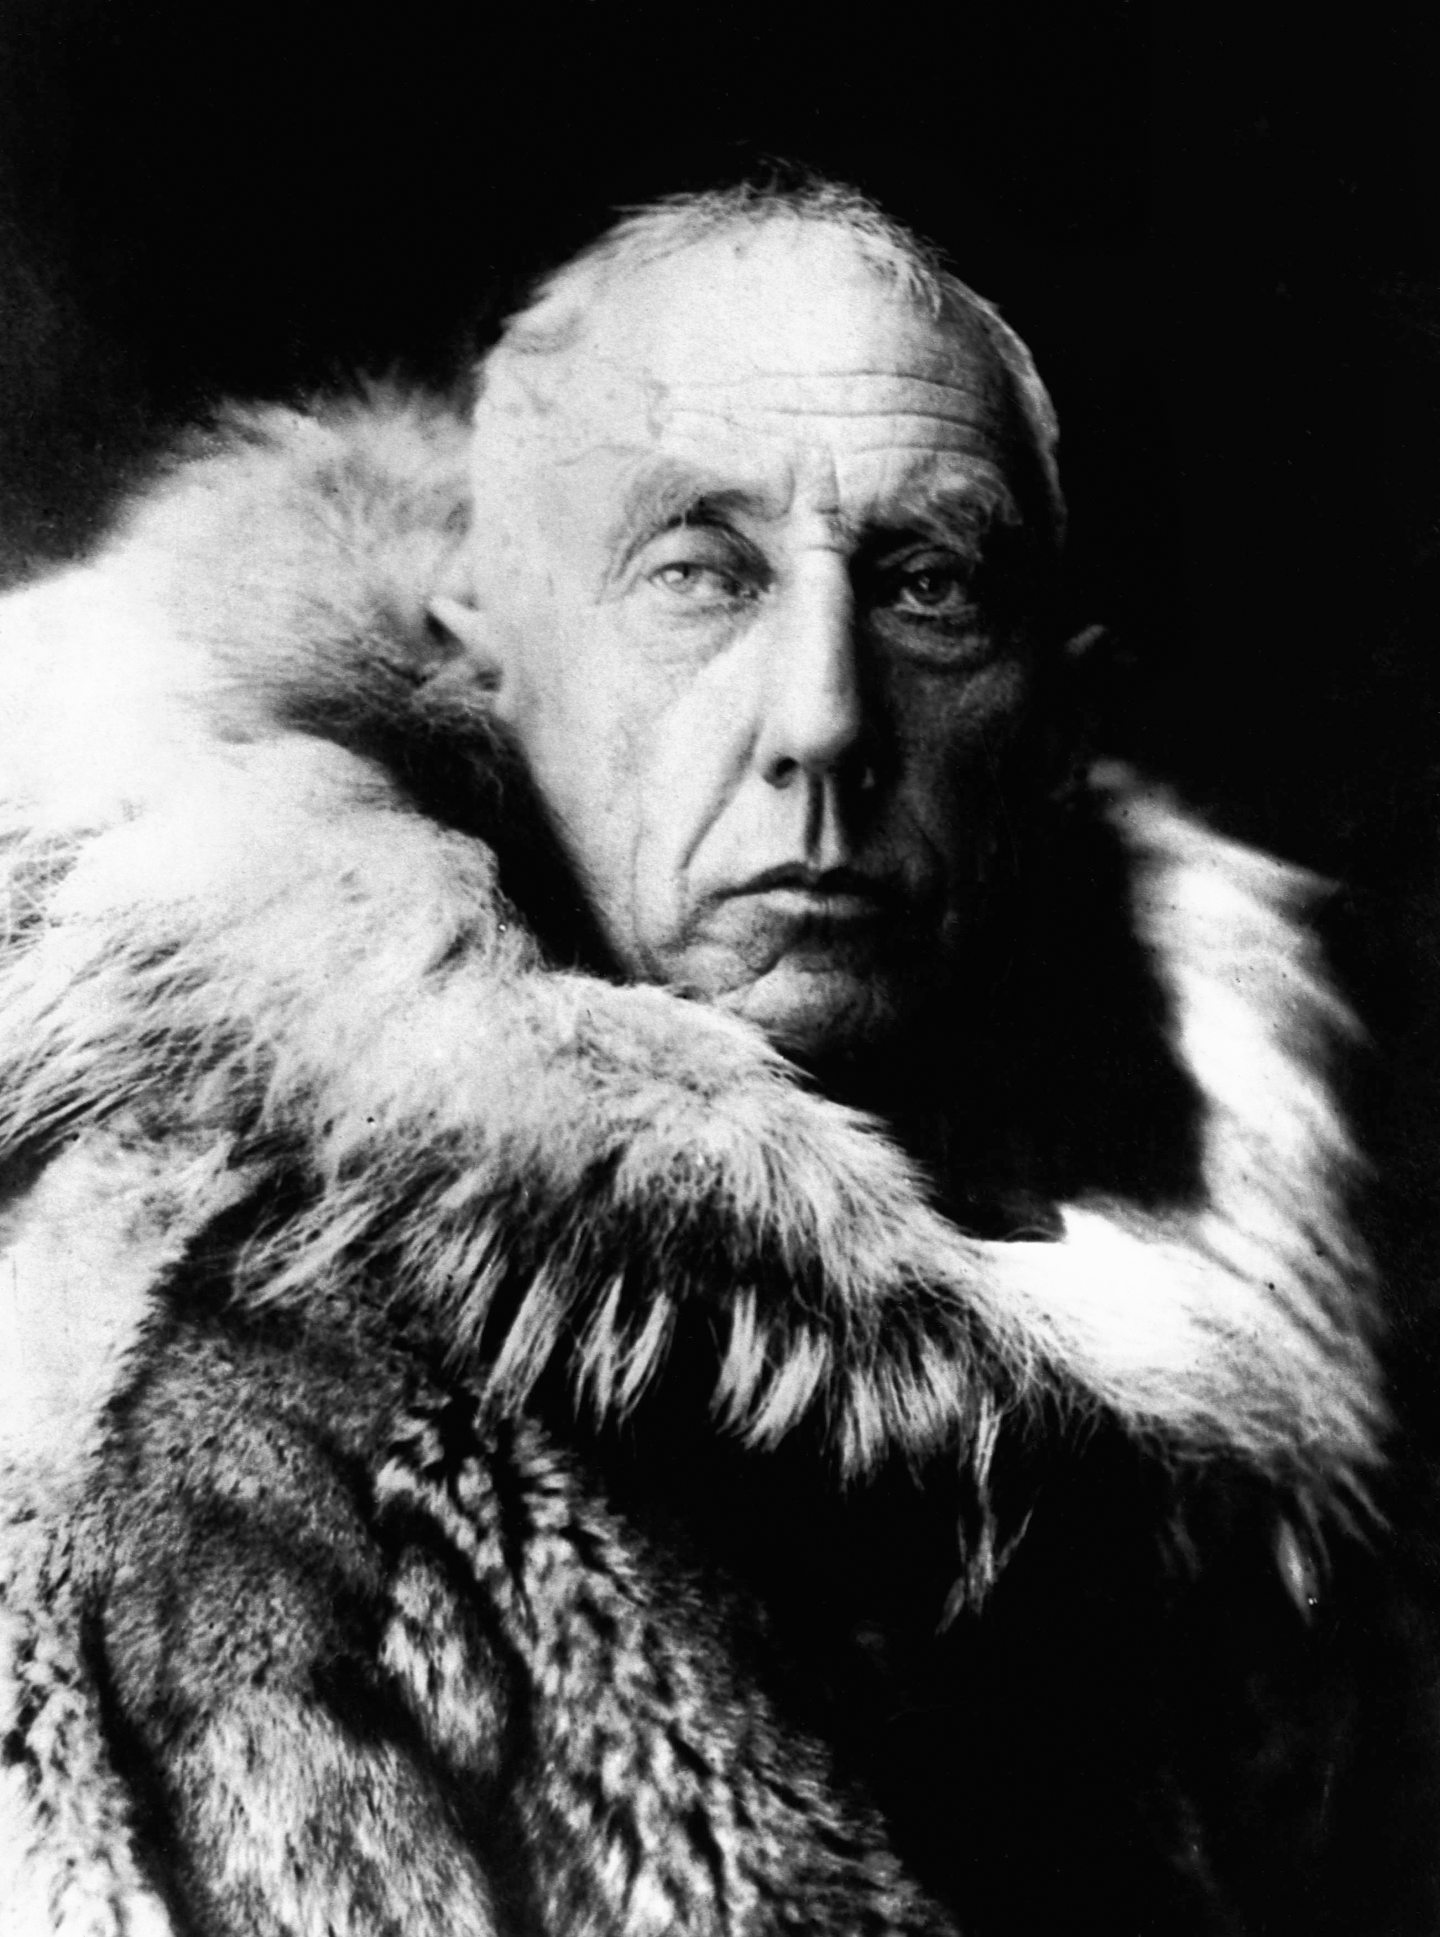 Colin Archer designed the vessel Fram, which steered Roald Amundsen to the South Pole in 1911.